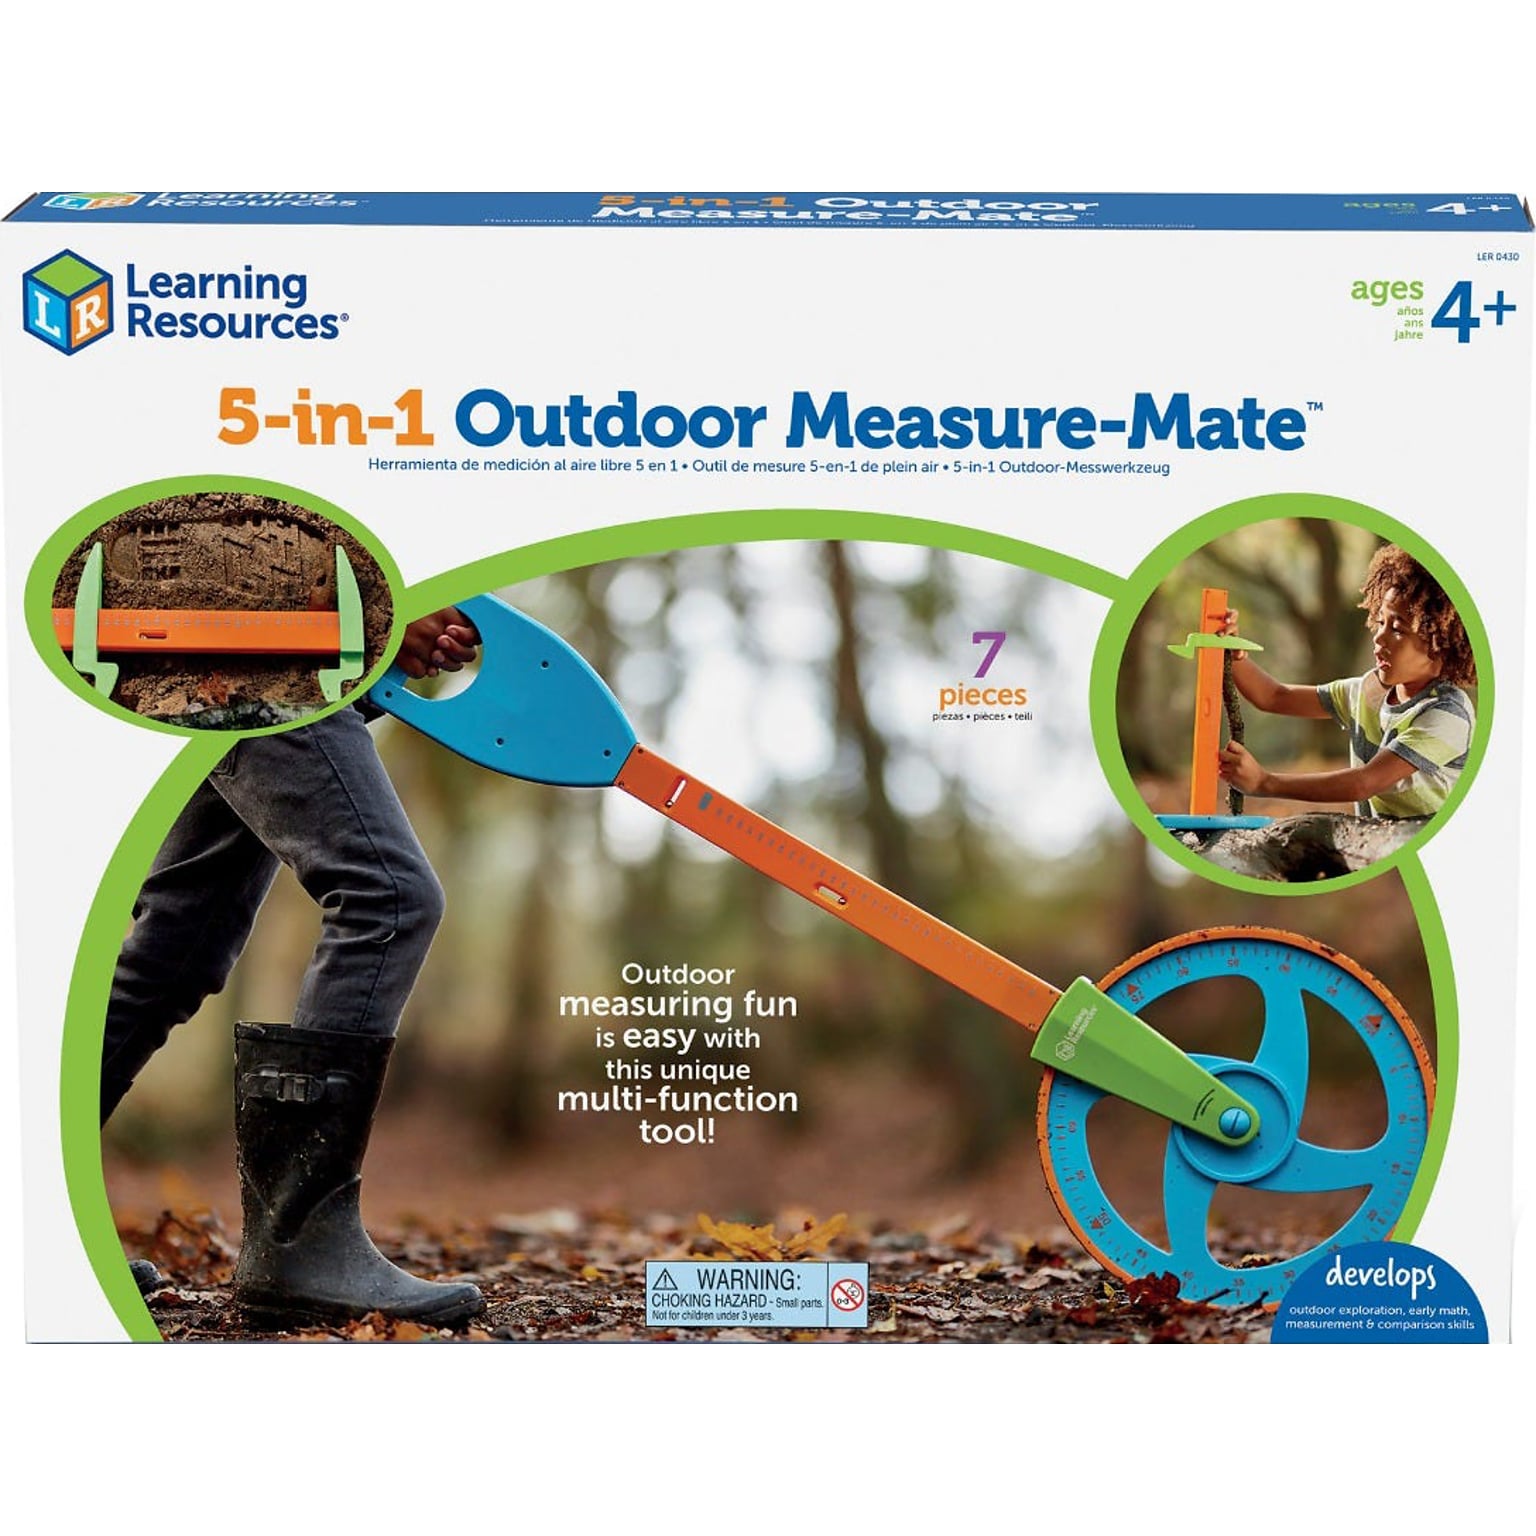 Learning Resources 5-in-1 Outdoor Measure-Mate, 2.2 x 14.4 x 13.6, Multicolor (LER0430)